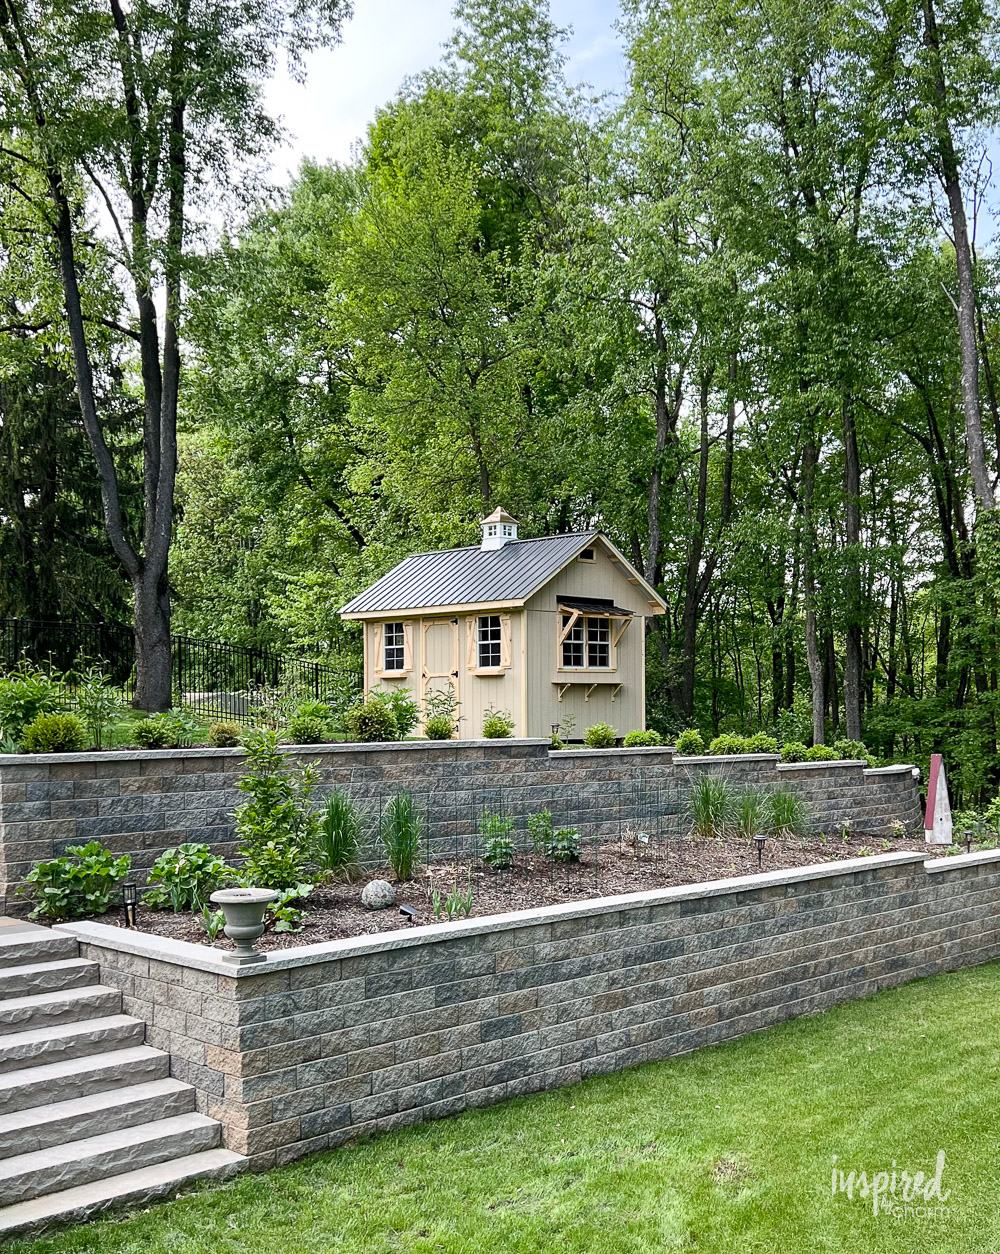 wood shed in a backyard on top of a retaining wall of stone.